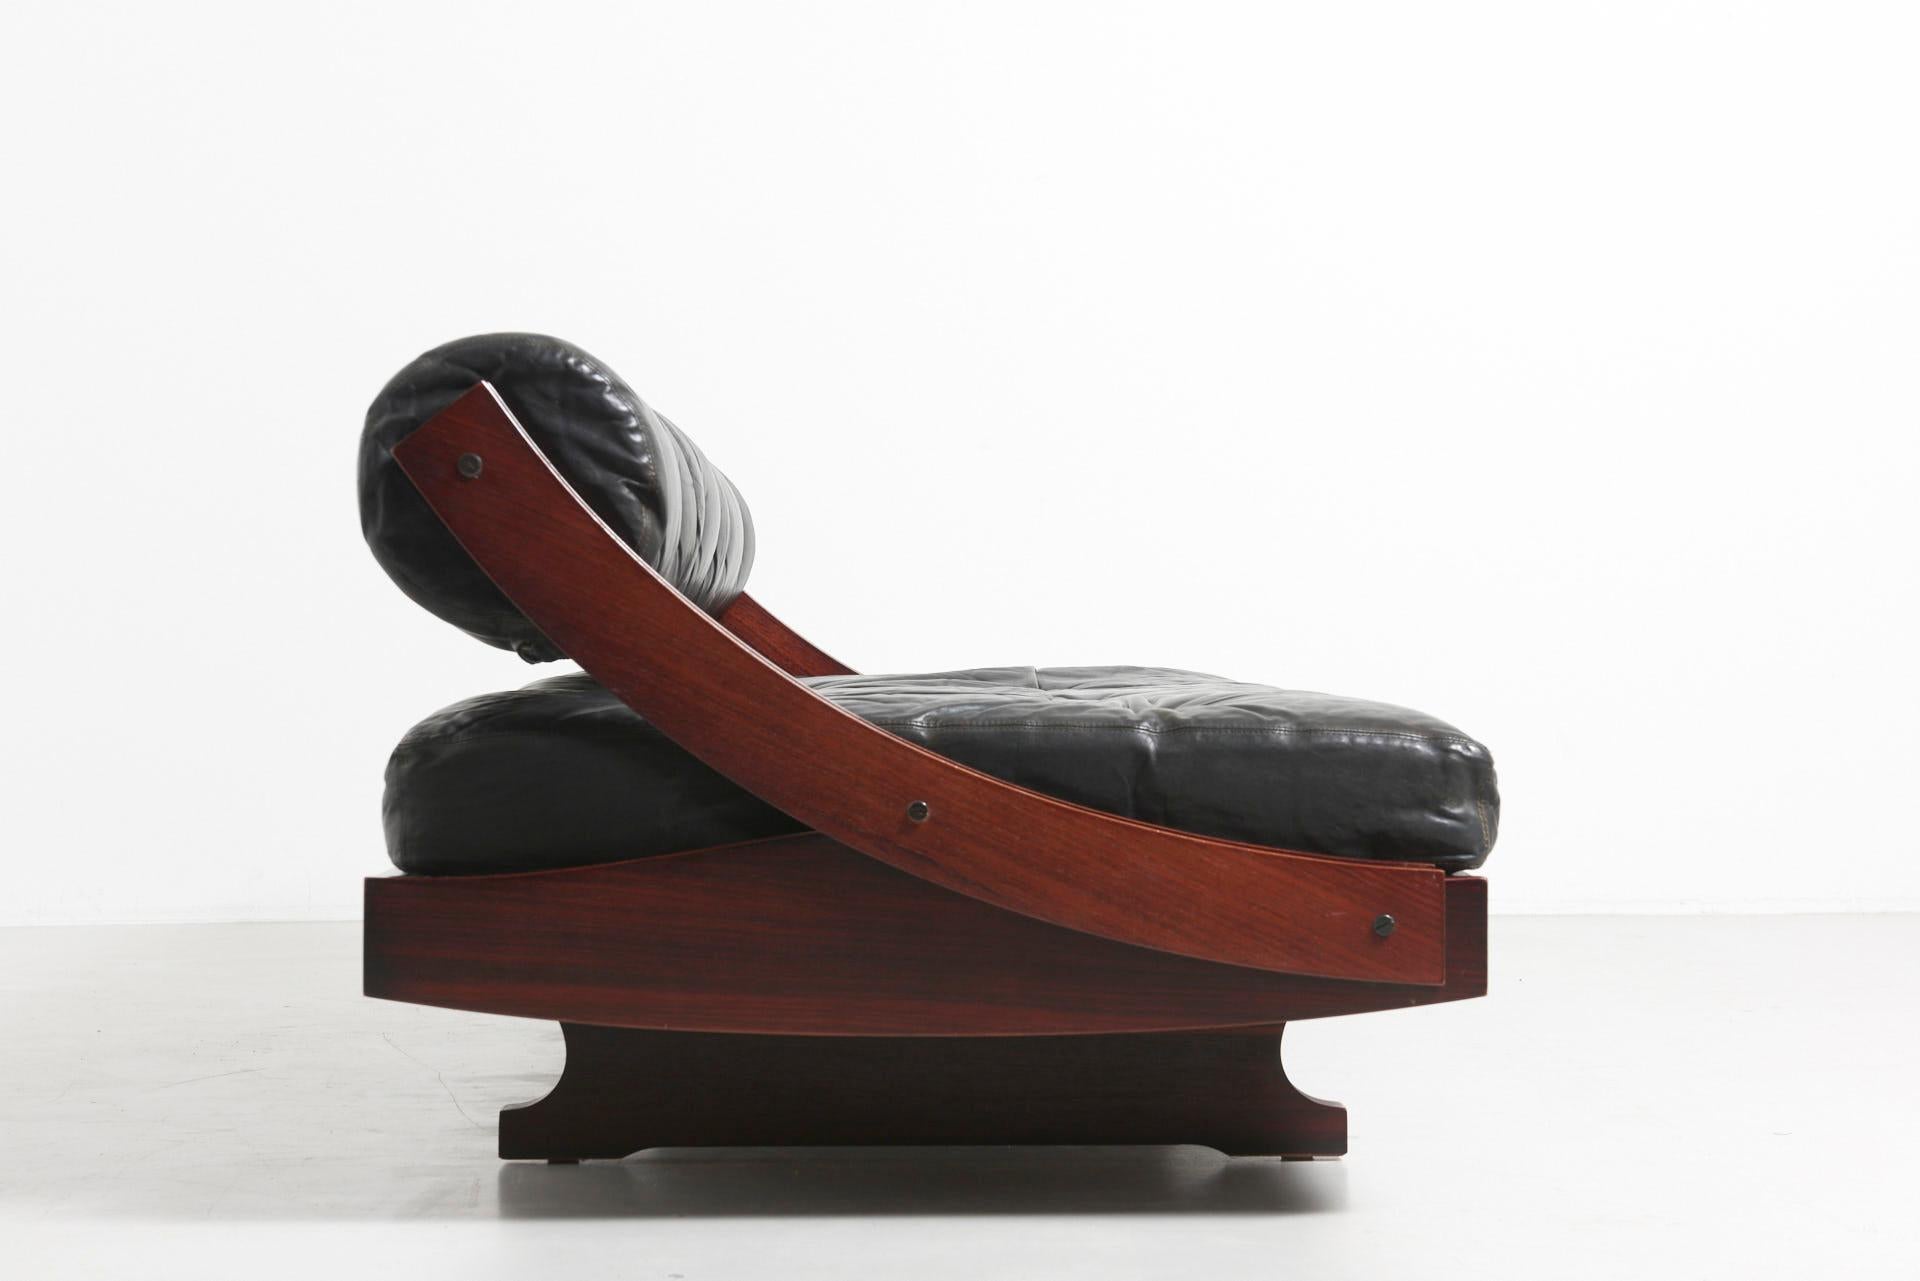 GS-195 Daybed by Gianni Songia for Sormani, 1960s (Moderne der Mitte des Jahrhunderts)